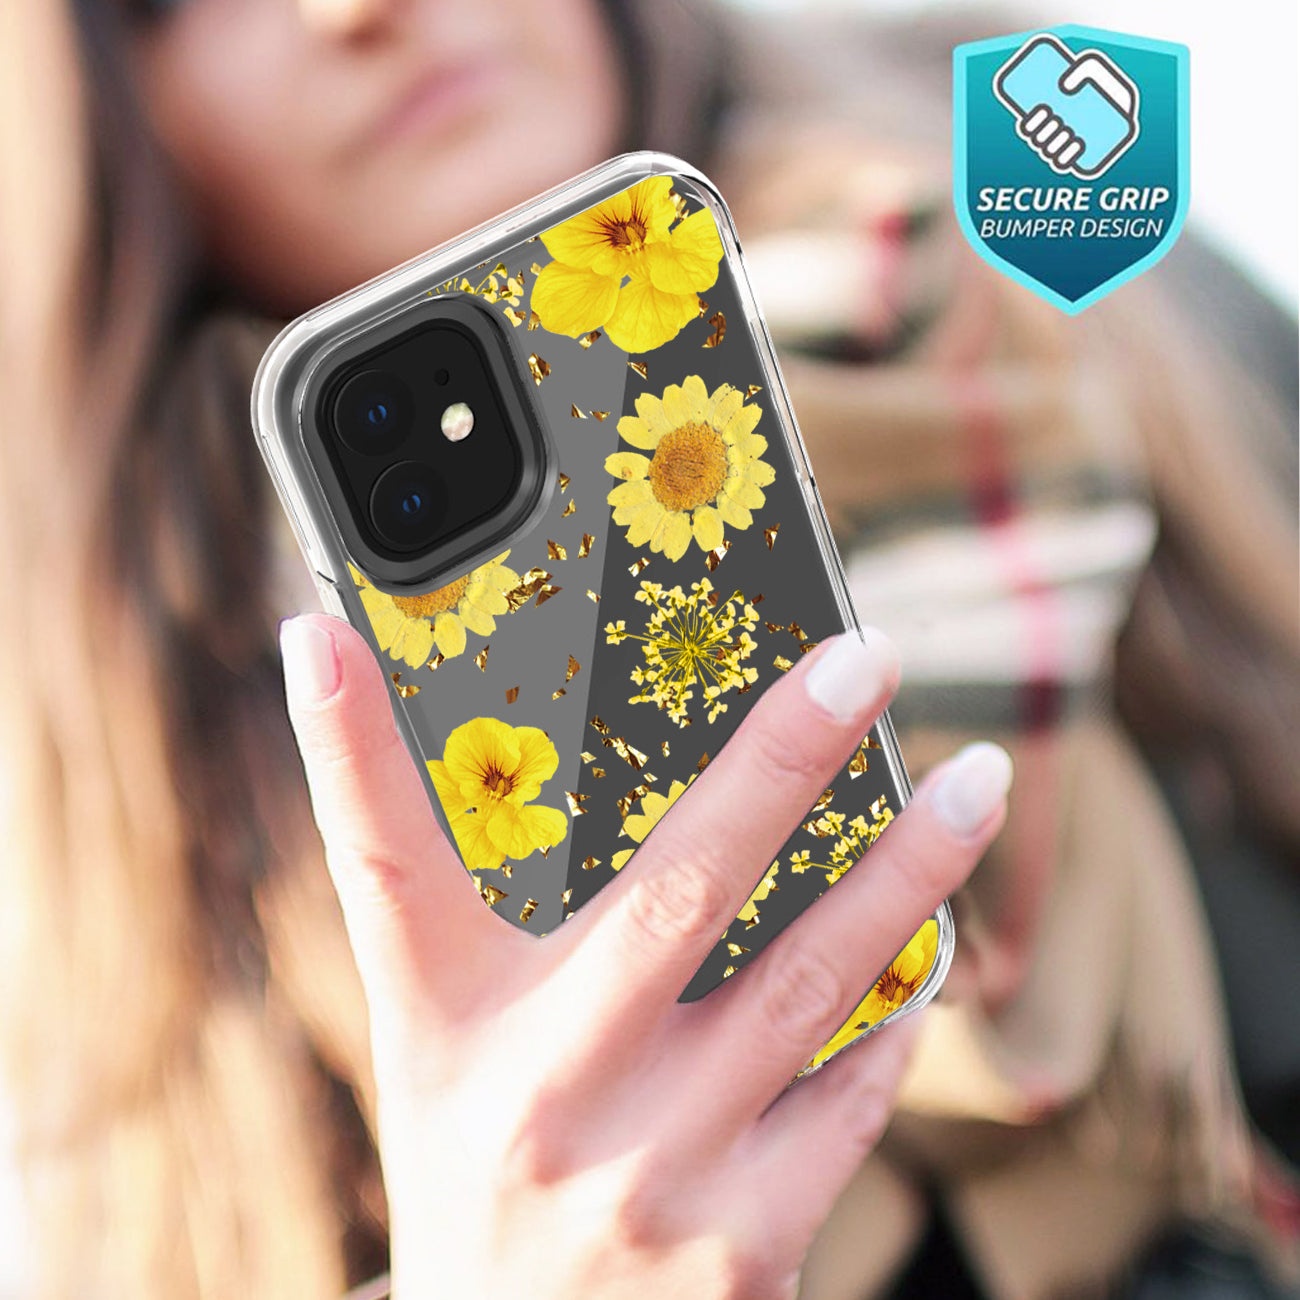 Pressed dried flower Design Phone case for APPLE IPHONE 11 PRO MAX in Yellow